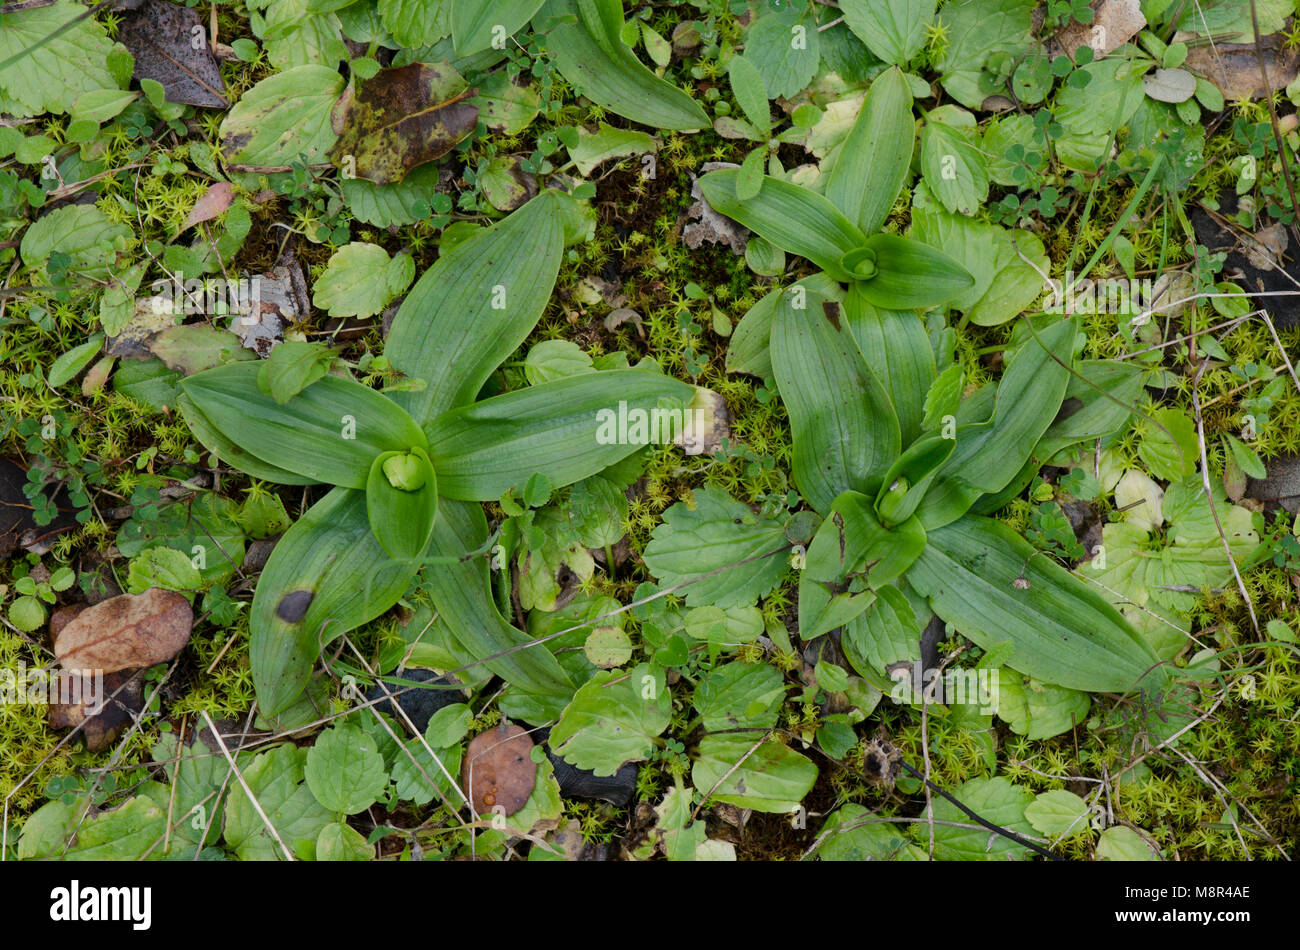 Basal rosettes of Ophrys bombyliflora, bumblebee orchid, starting to grow, Andalusia, Spain. Stock Photo